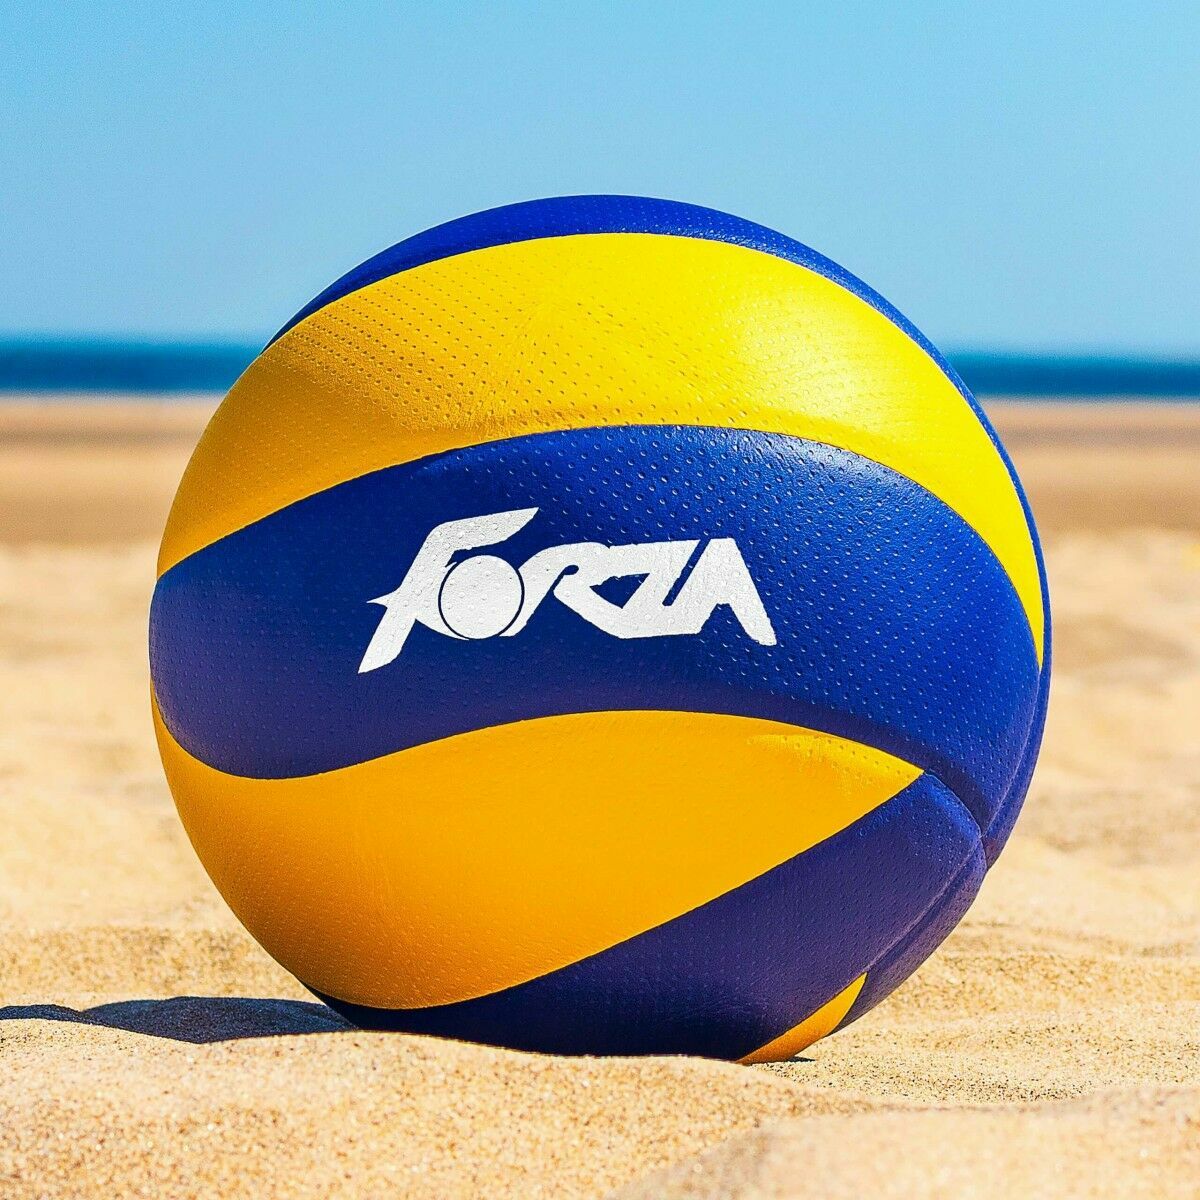 forza_size_5_competition_standard_volleyball_for_all_volleyball_tournaments_and_matches.jpg